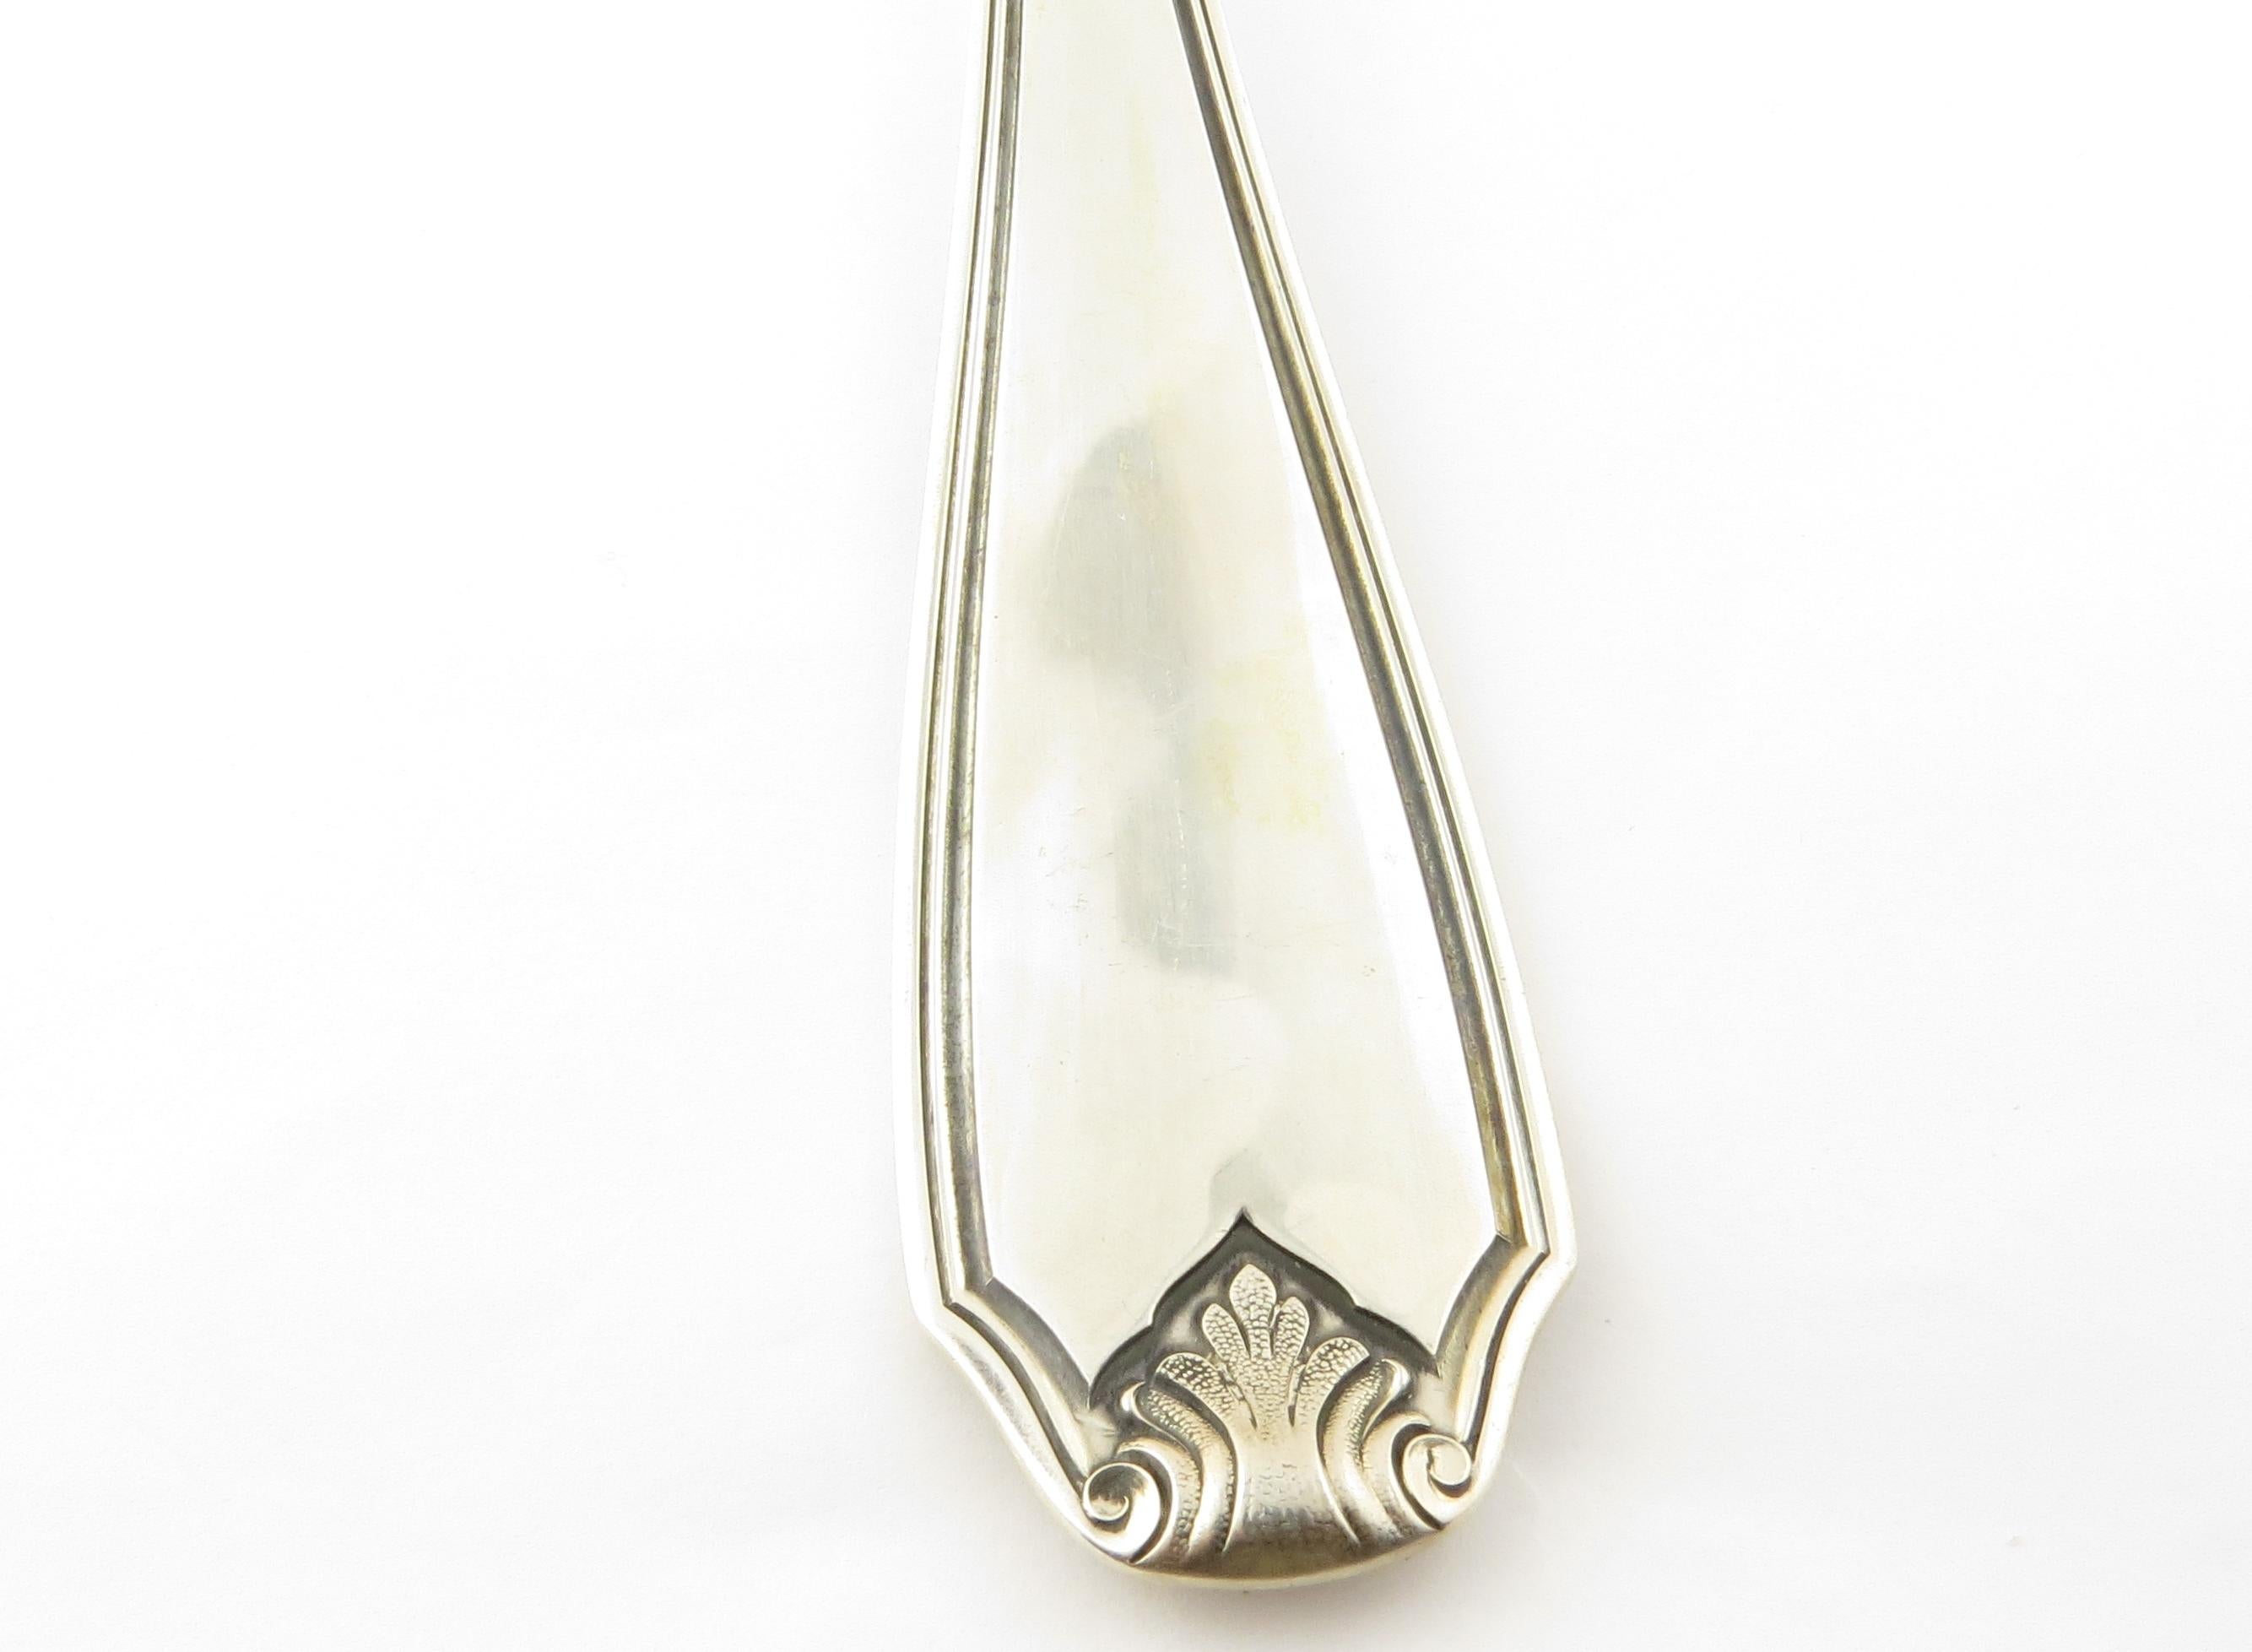 Buccellati sterling silver serving fork in the Piedmont pattern.
 Marked: BUCCELLATI STERLING ITALY. 
No monogram. 
Measures: 10 3/8